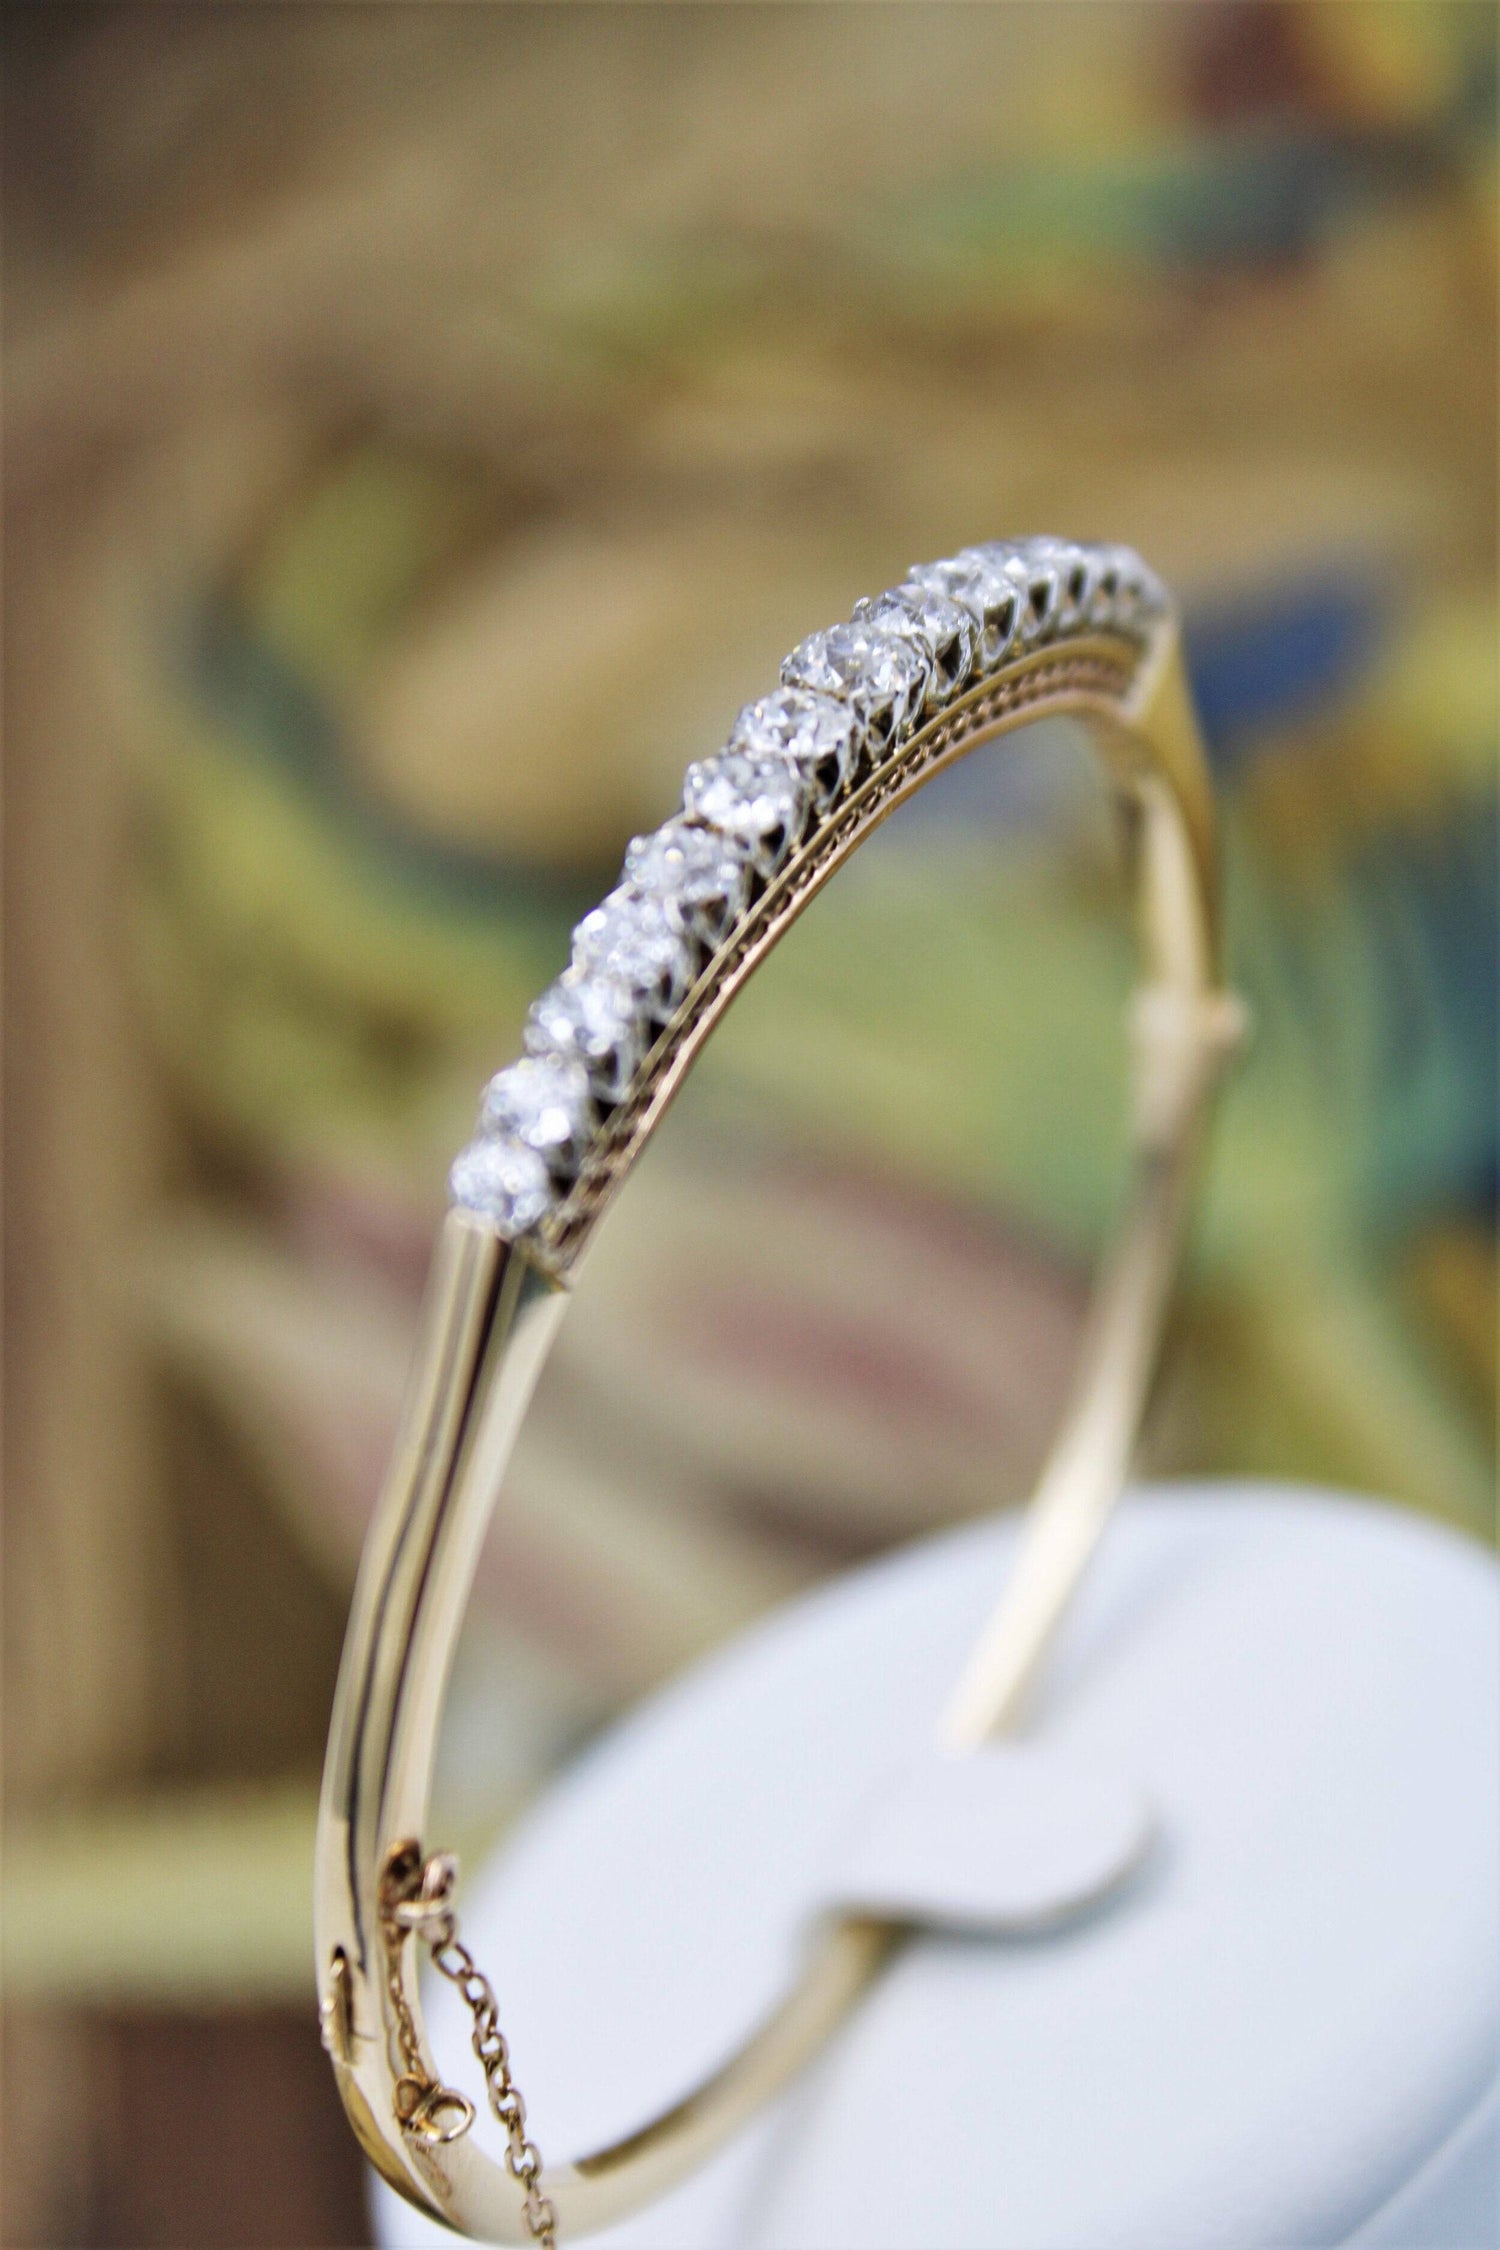 An exceptionally fine Graduated Diamond Bangle mounted in 15ct Yellow Gold (tested), Circa 1890 - 1905. - Robin Haydock Antiques